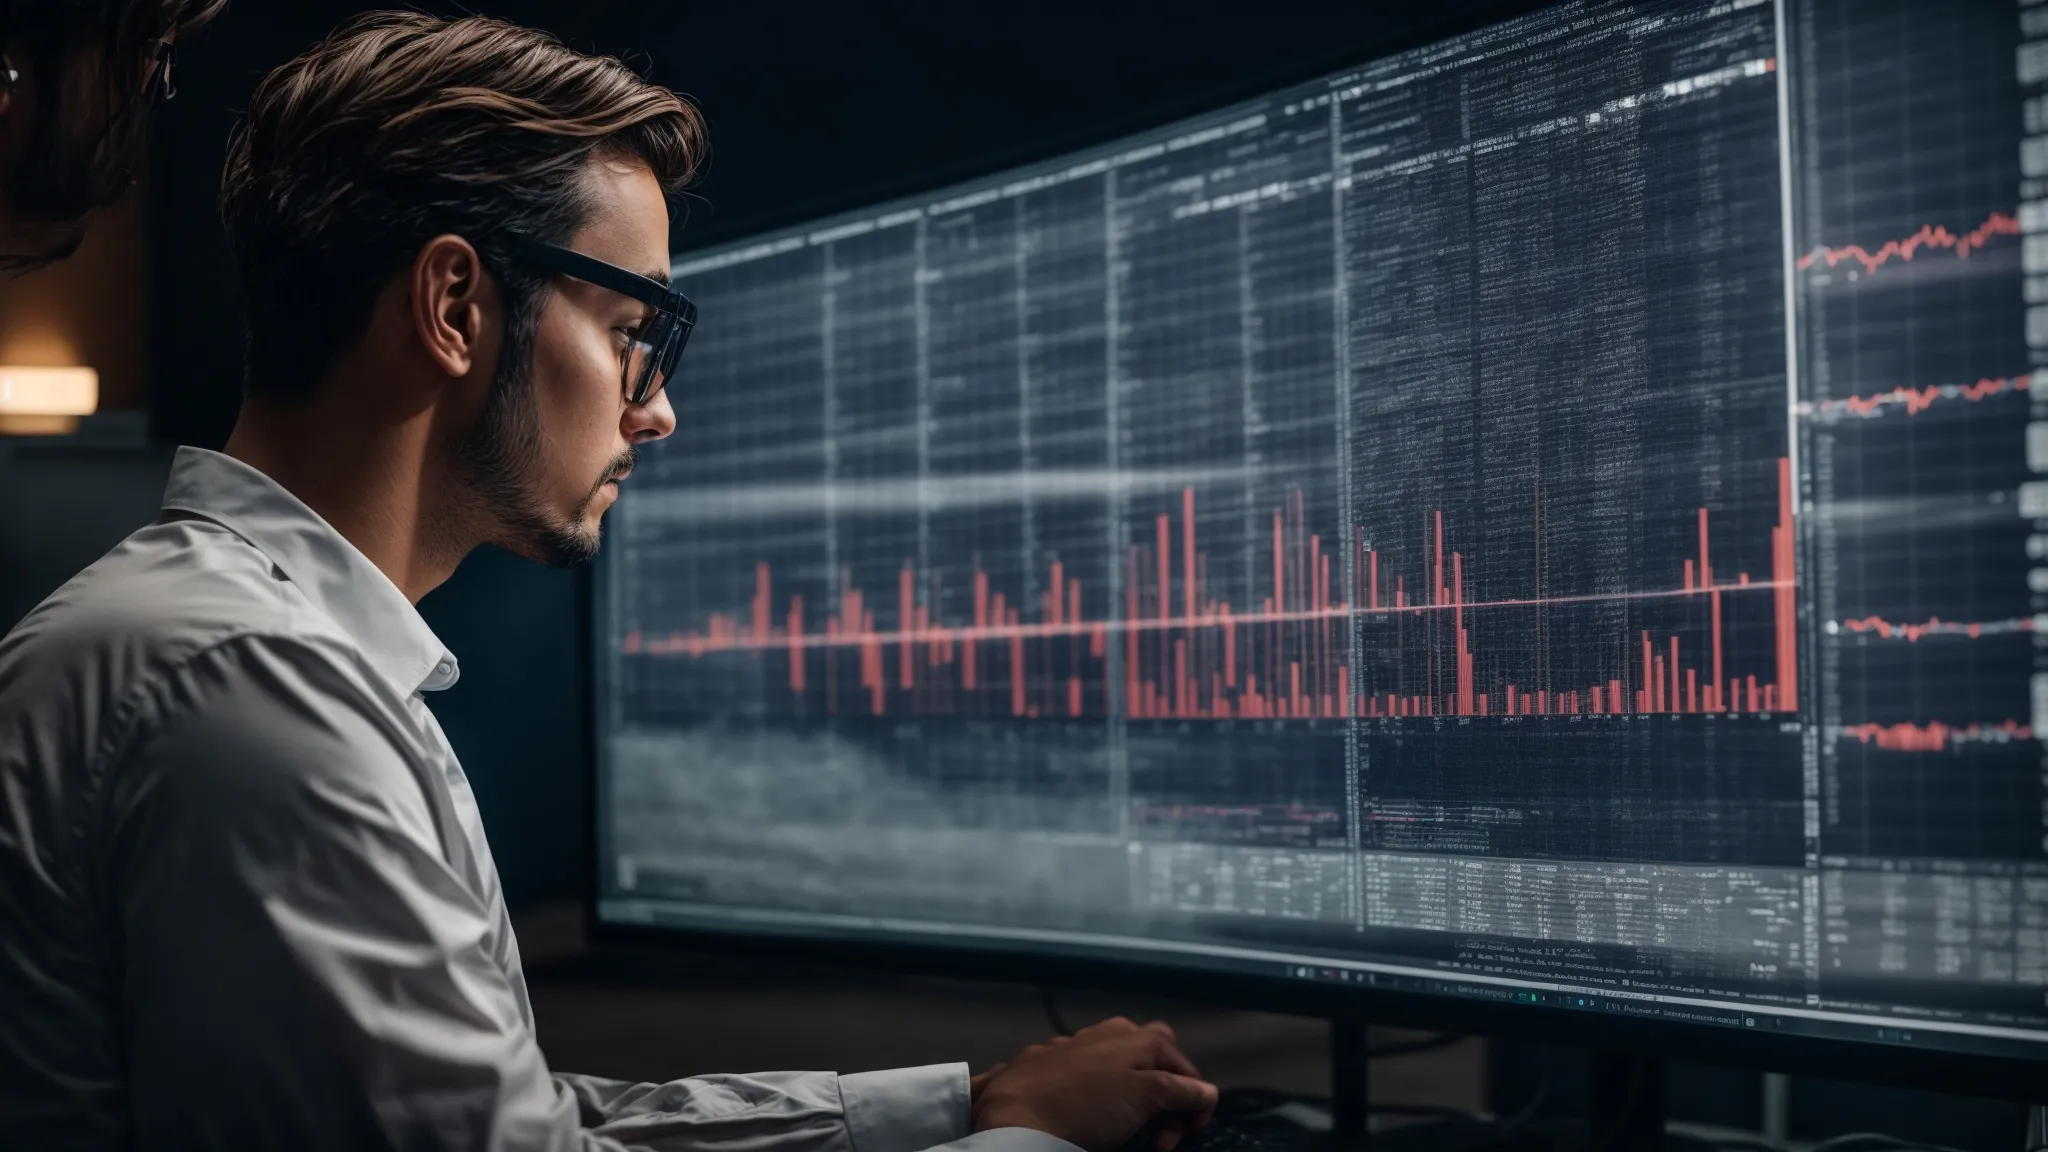 a focused individual intently studies data trends on a large monitor, revealing hidden patterns in a sea of analytics.